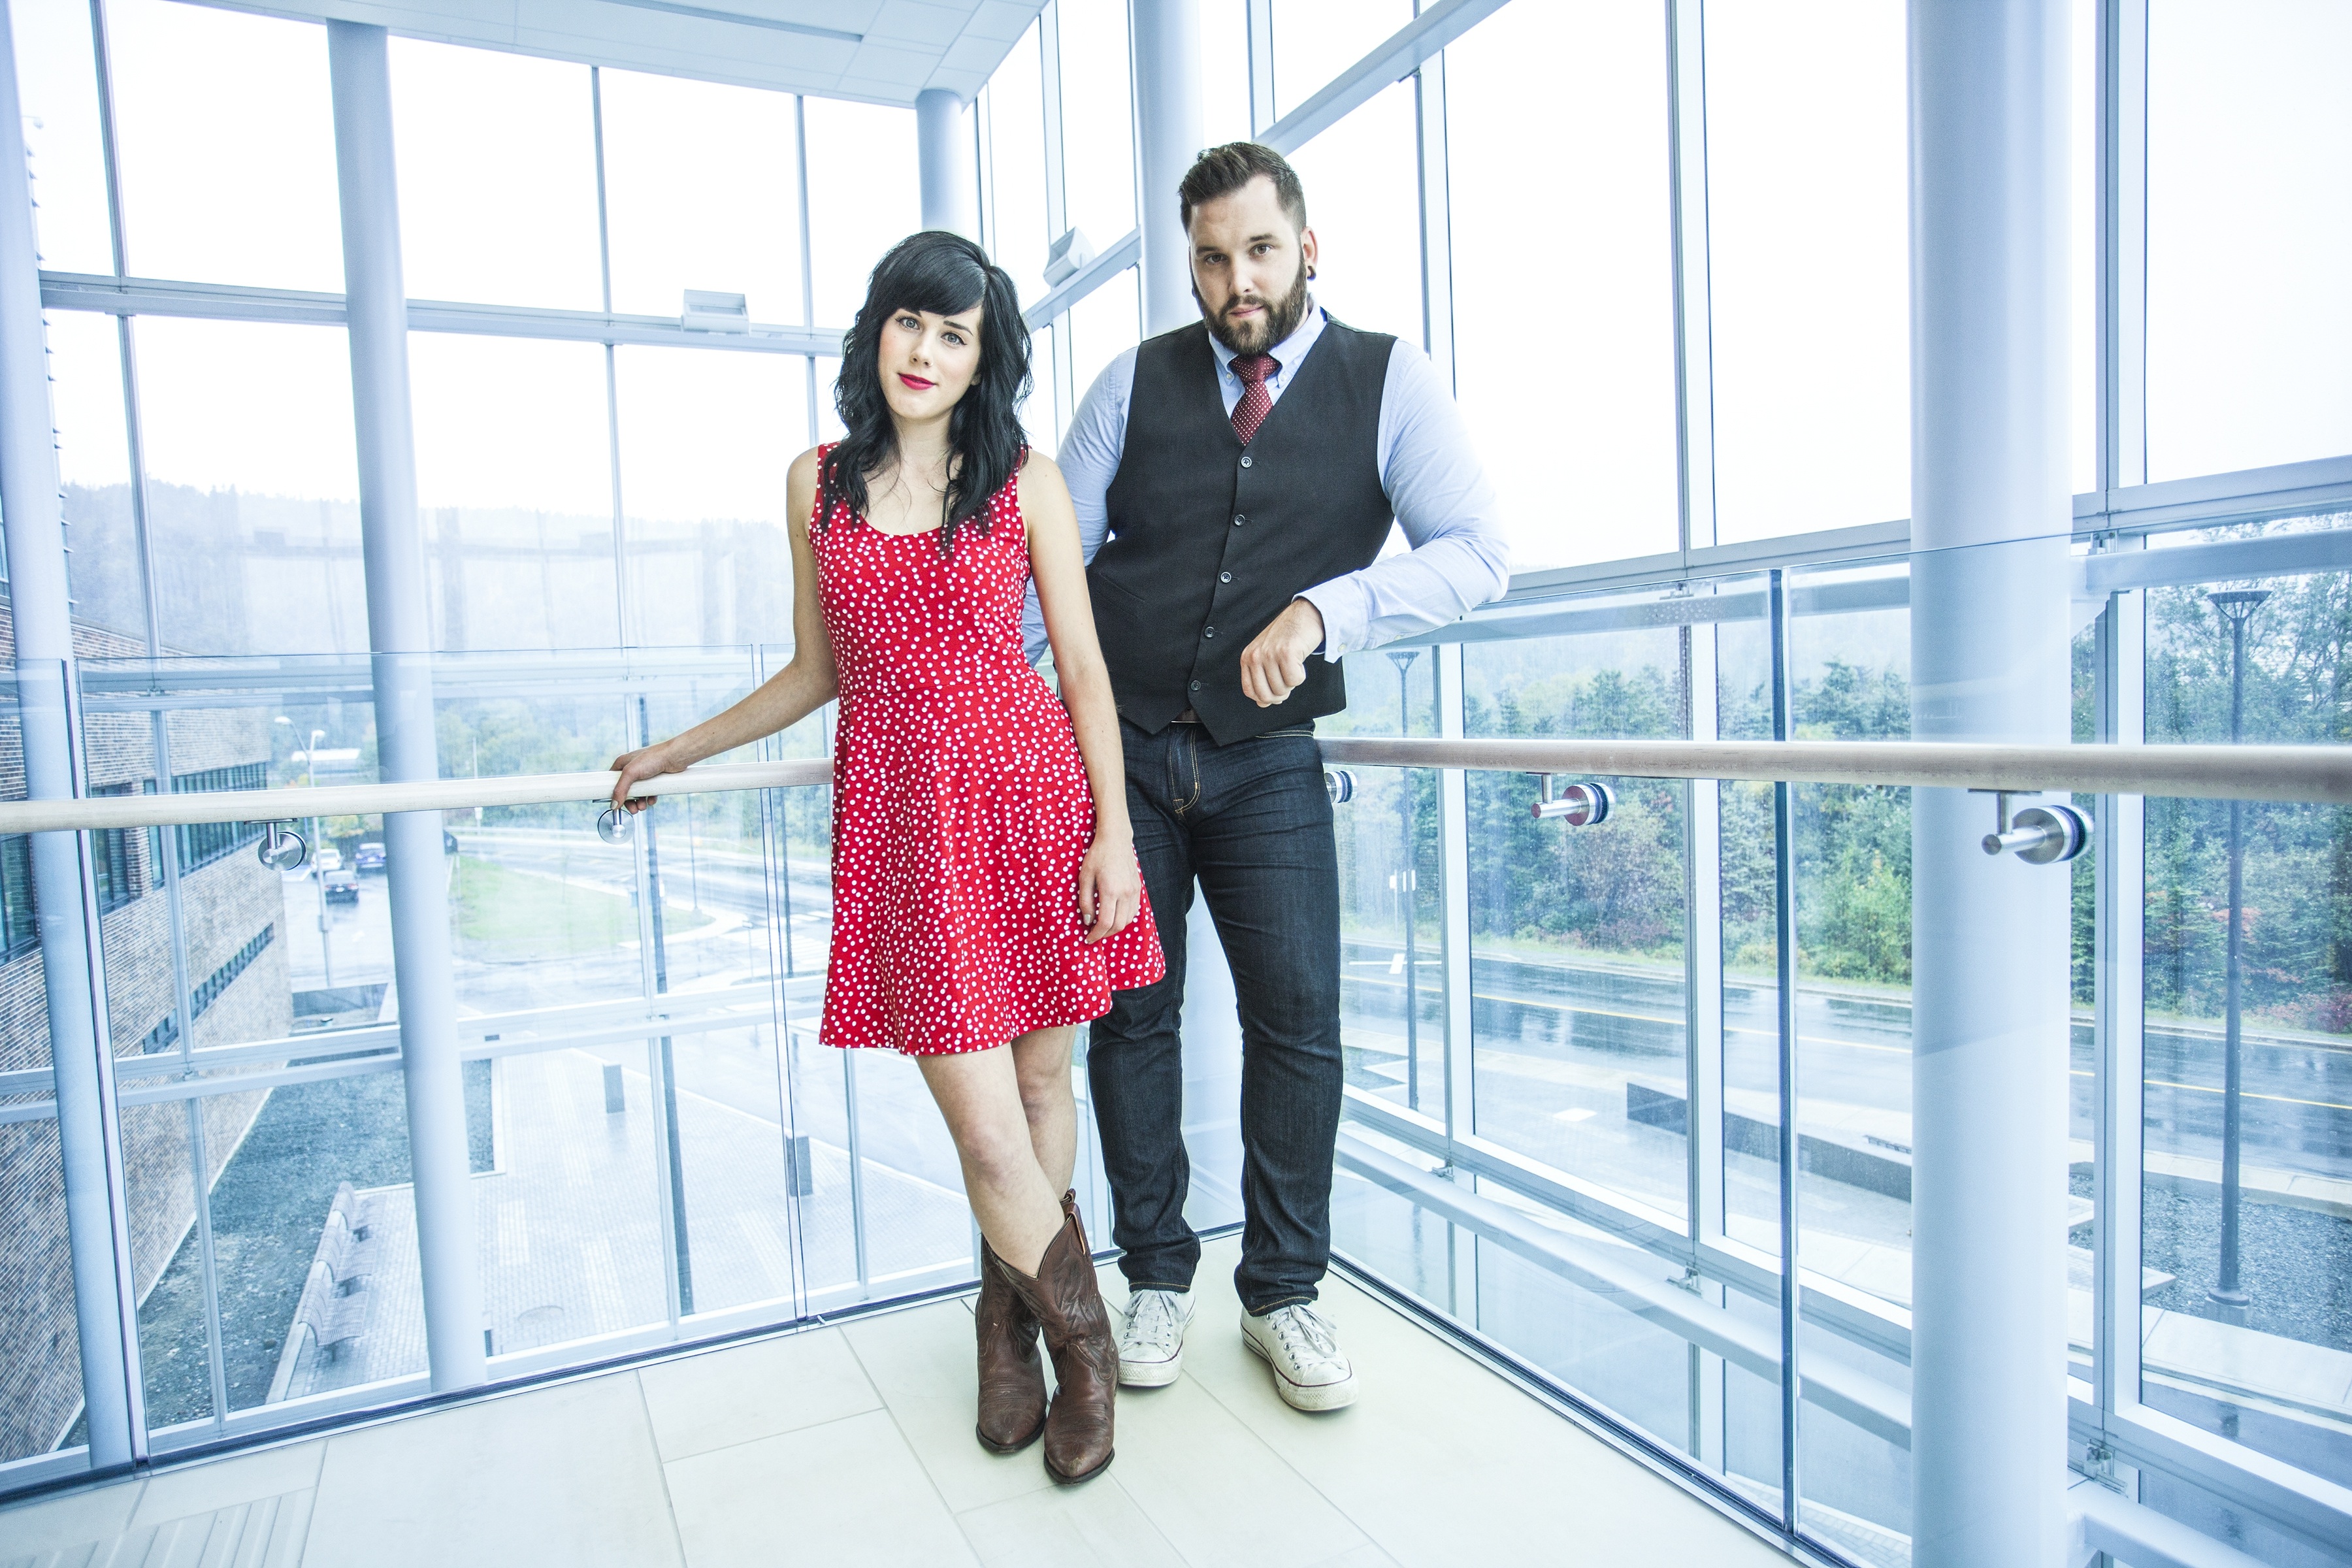 IN SYNC - St. John’s-based duo The Fortunate Ones bring their unique musical styles to Fratters on April 22nd.